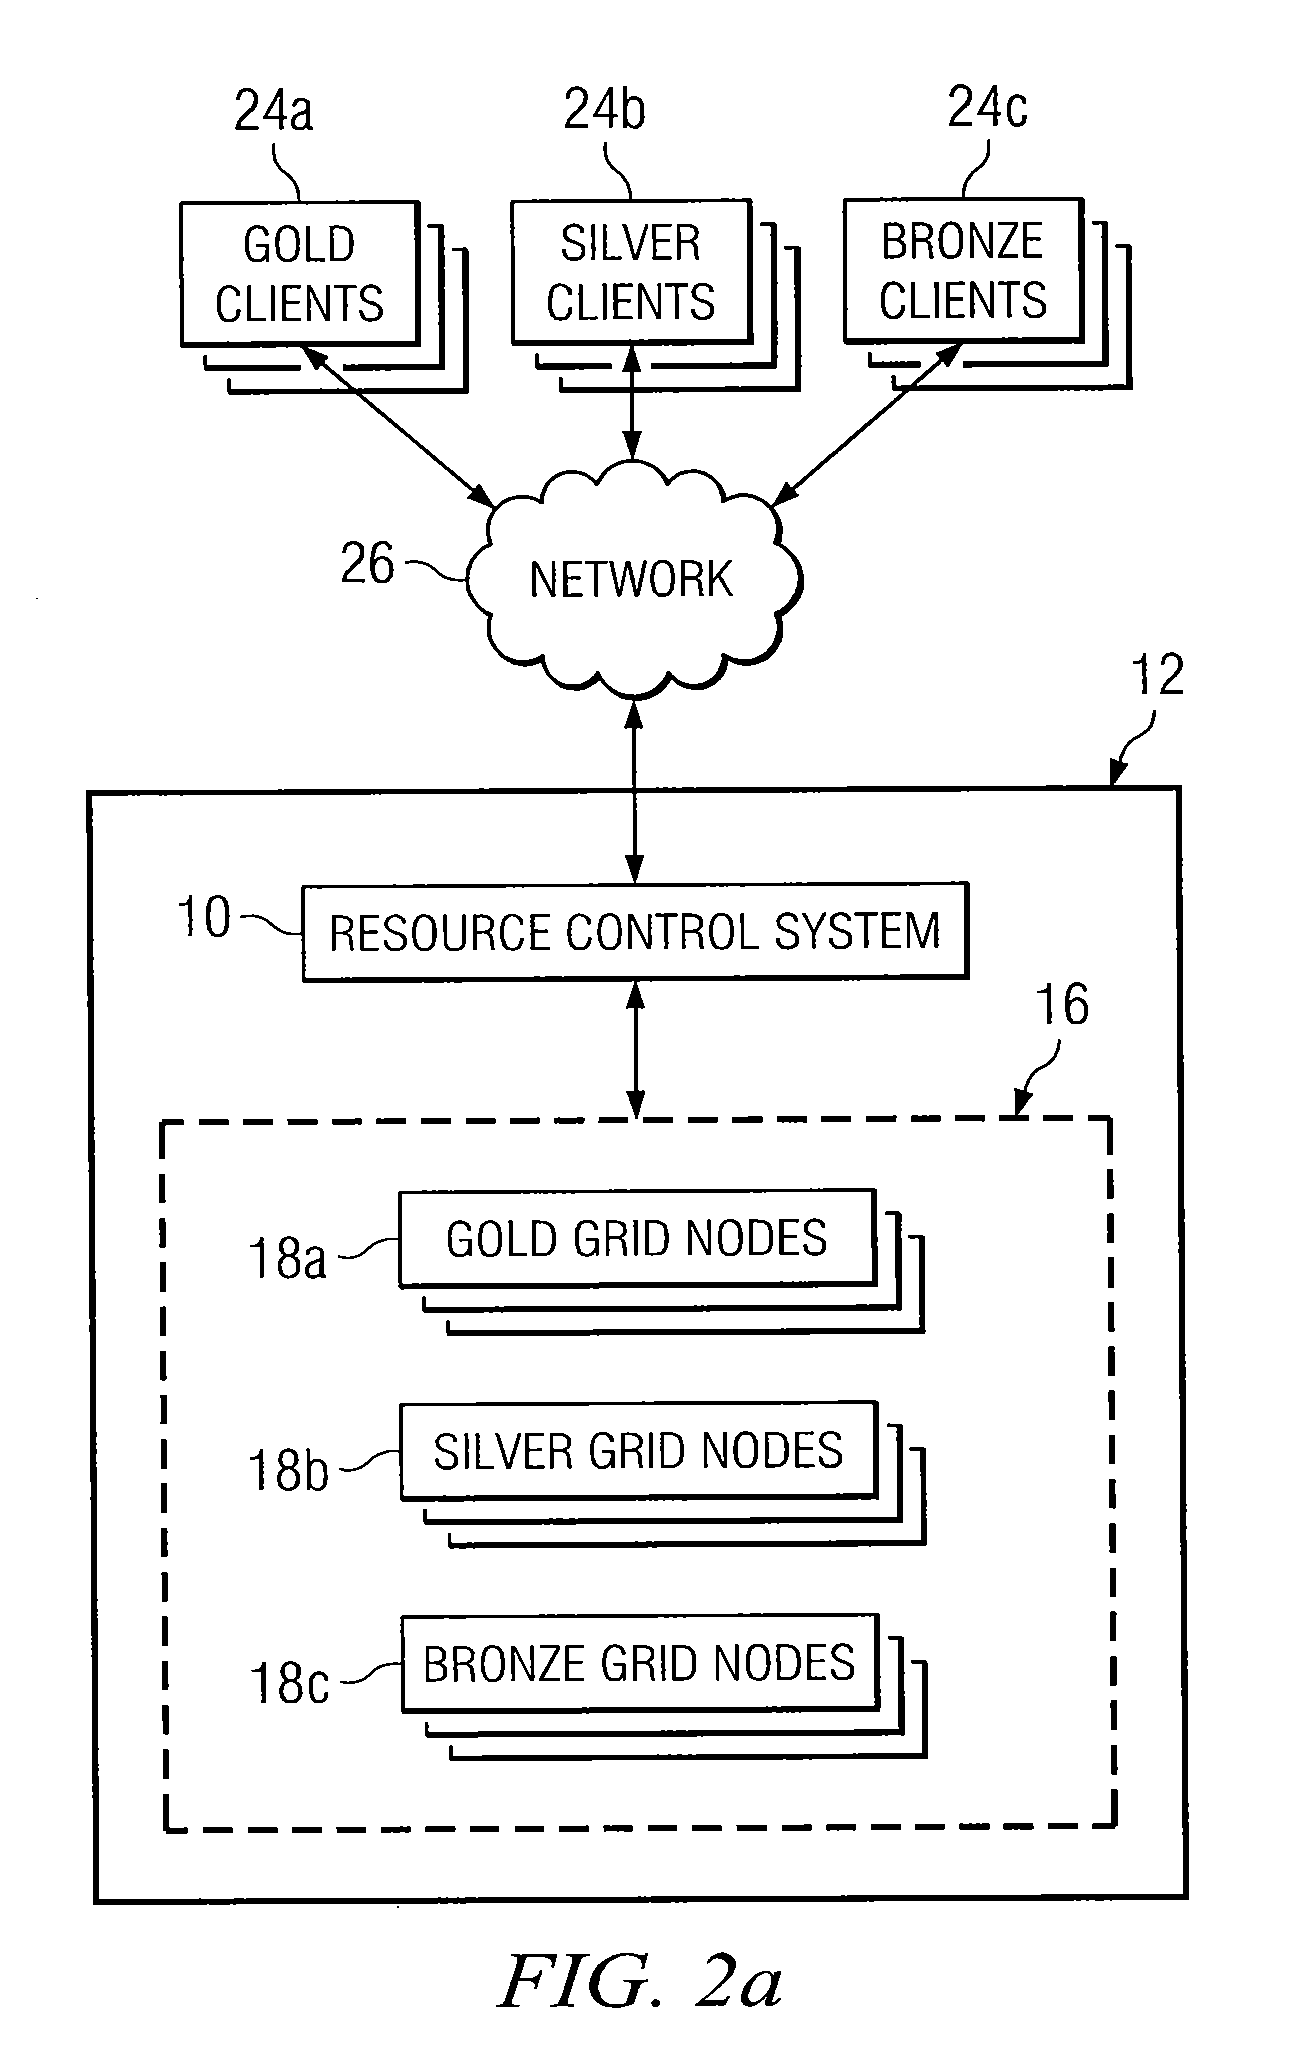 System and Method for Allocating Resources in a Distributed Computing System